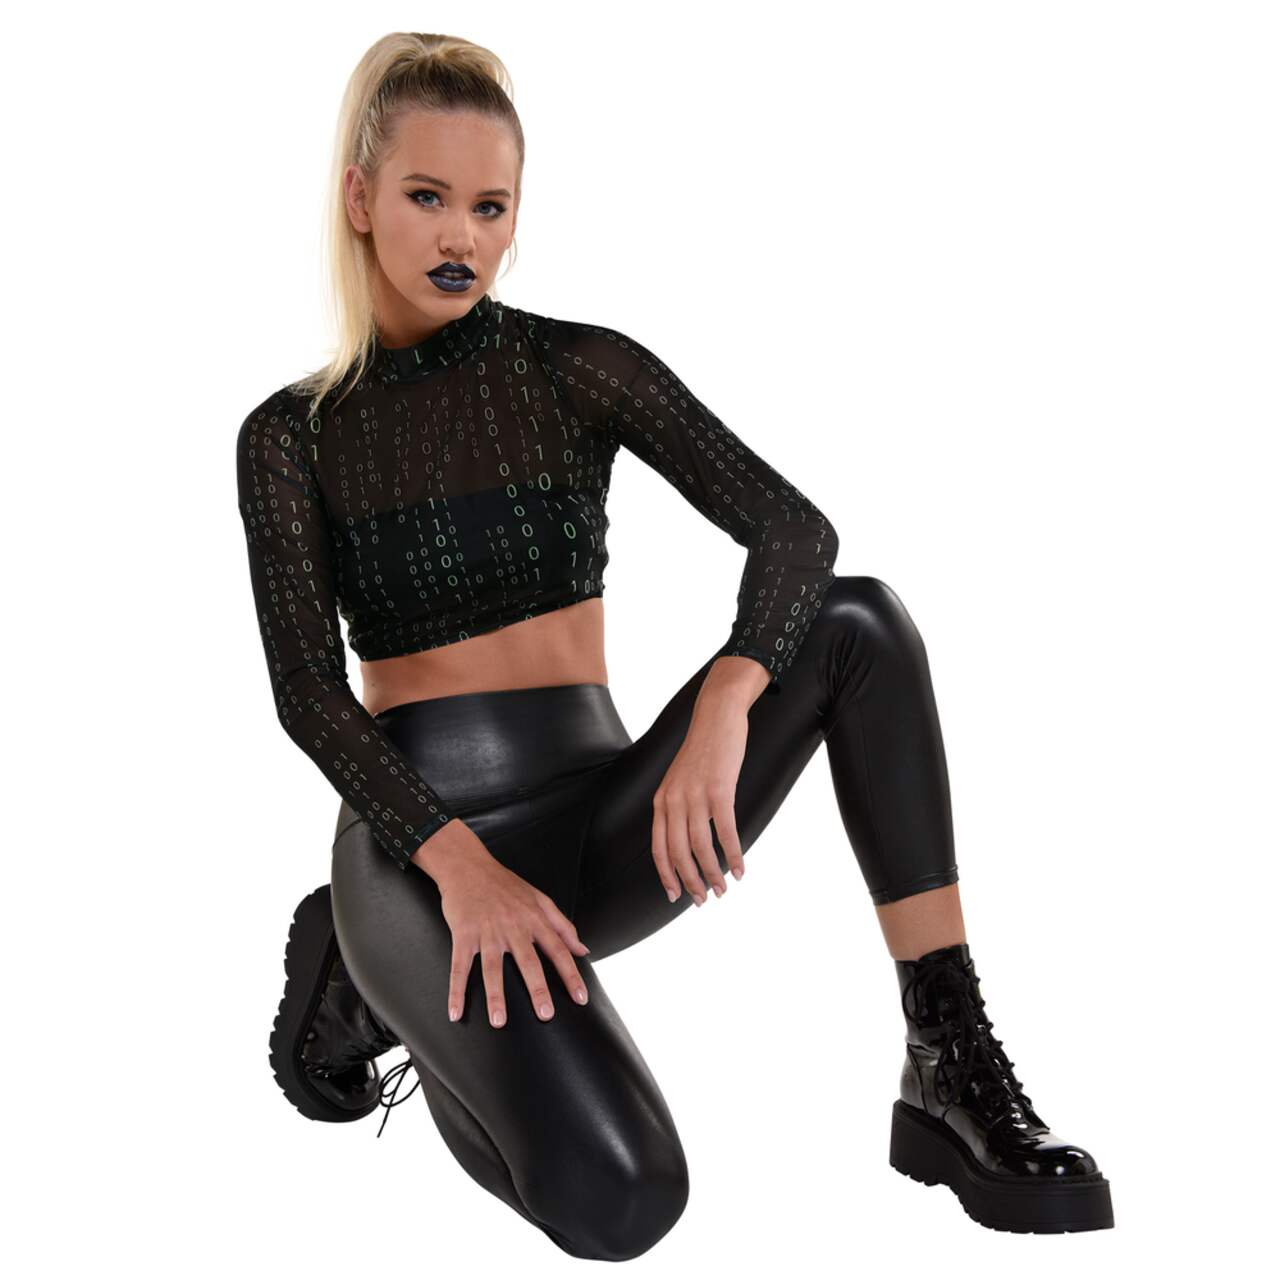 Cyberpunk Binary Code Mesh Top, Black, Assorted Sizes, Wearable Costume  Accessory for Halloween